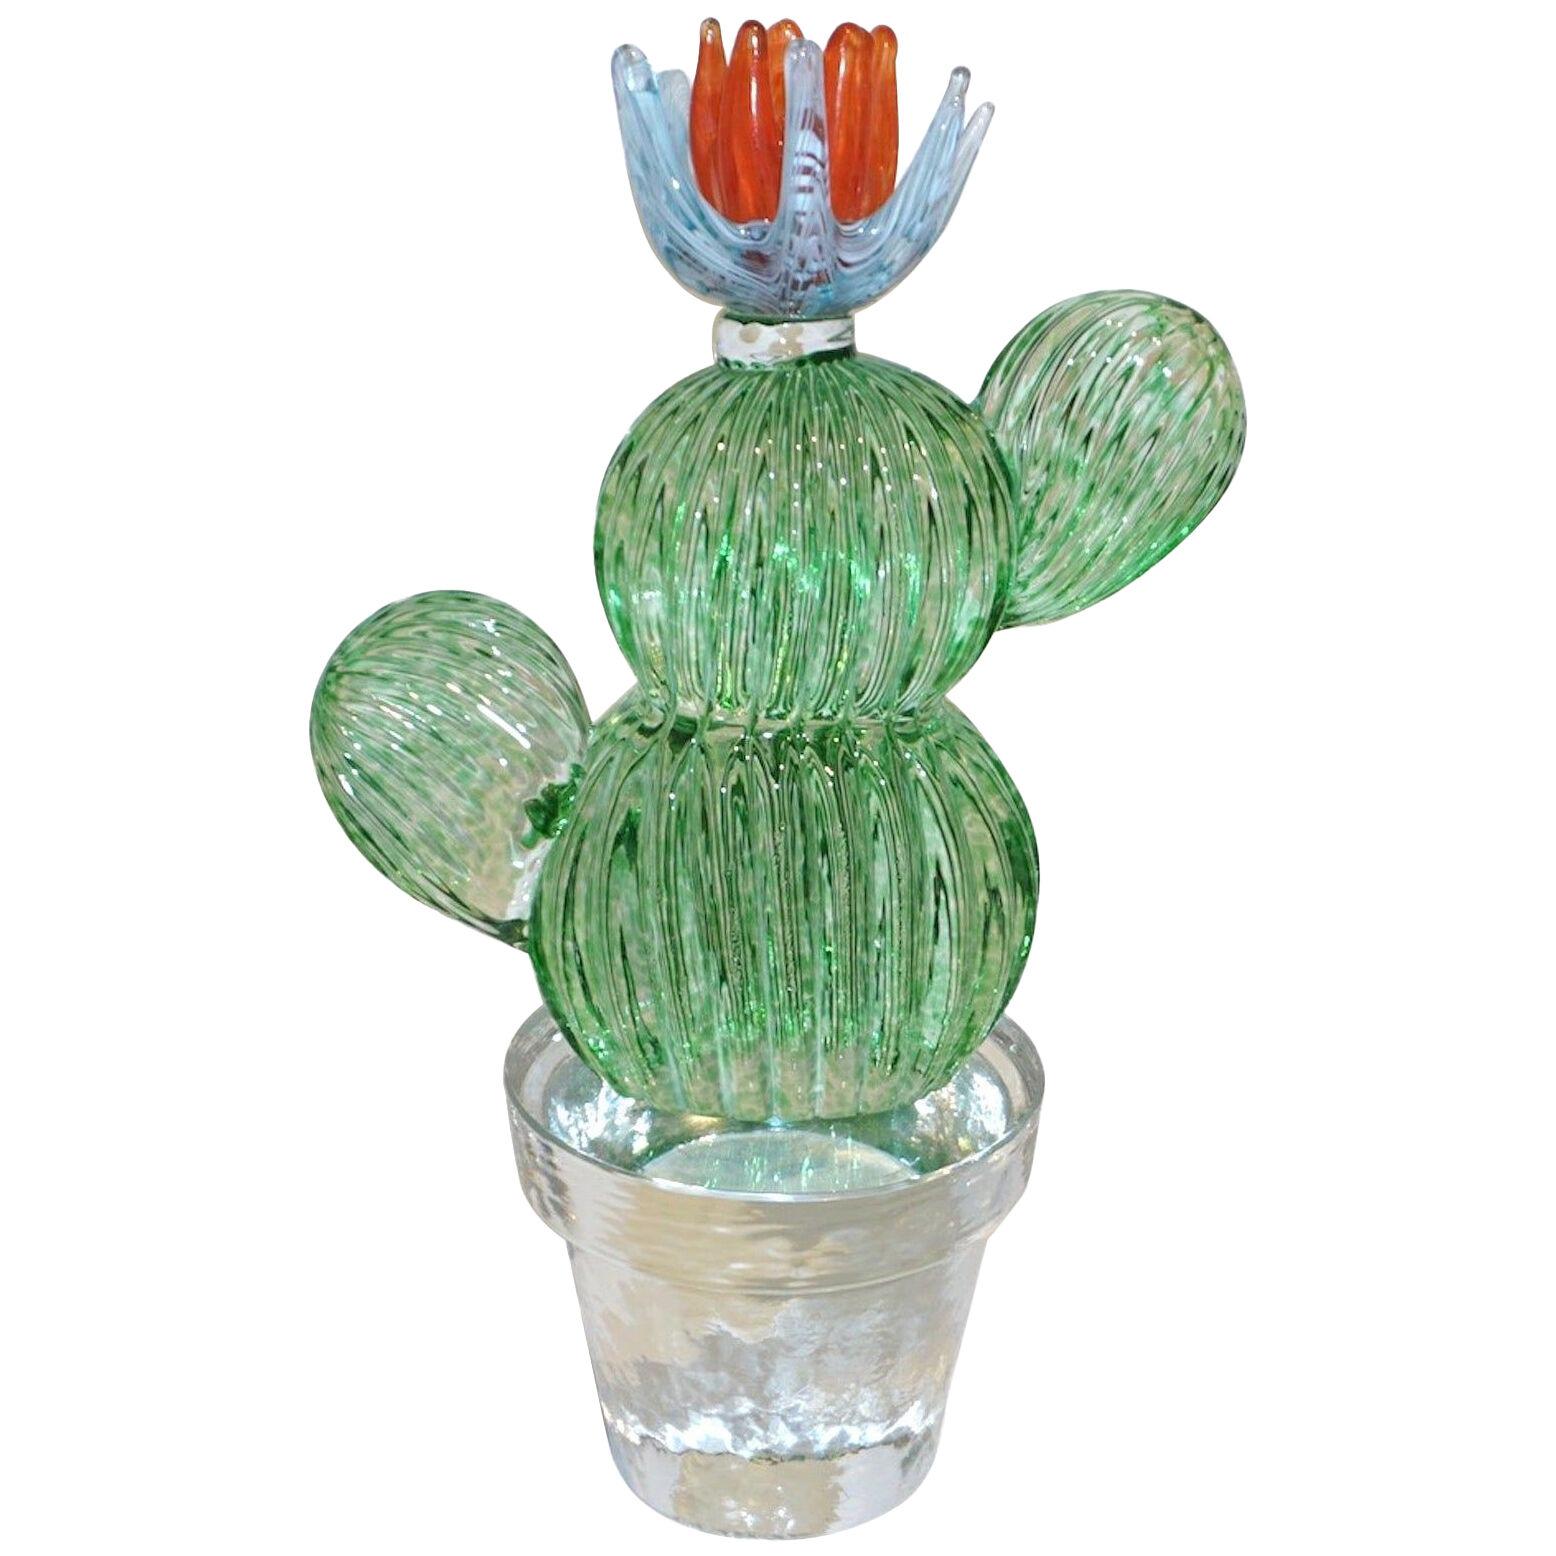 1990s Marta Marzotto Vintage Murano Glass Green Cactus Plant & Blue Coral Flower